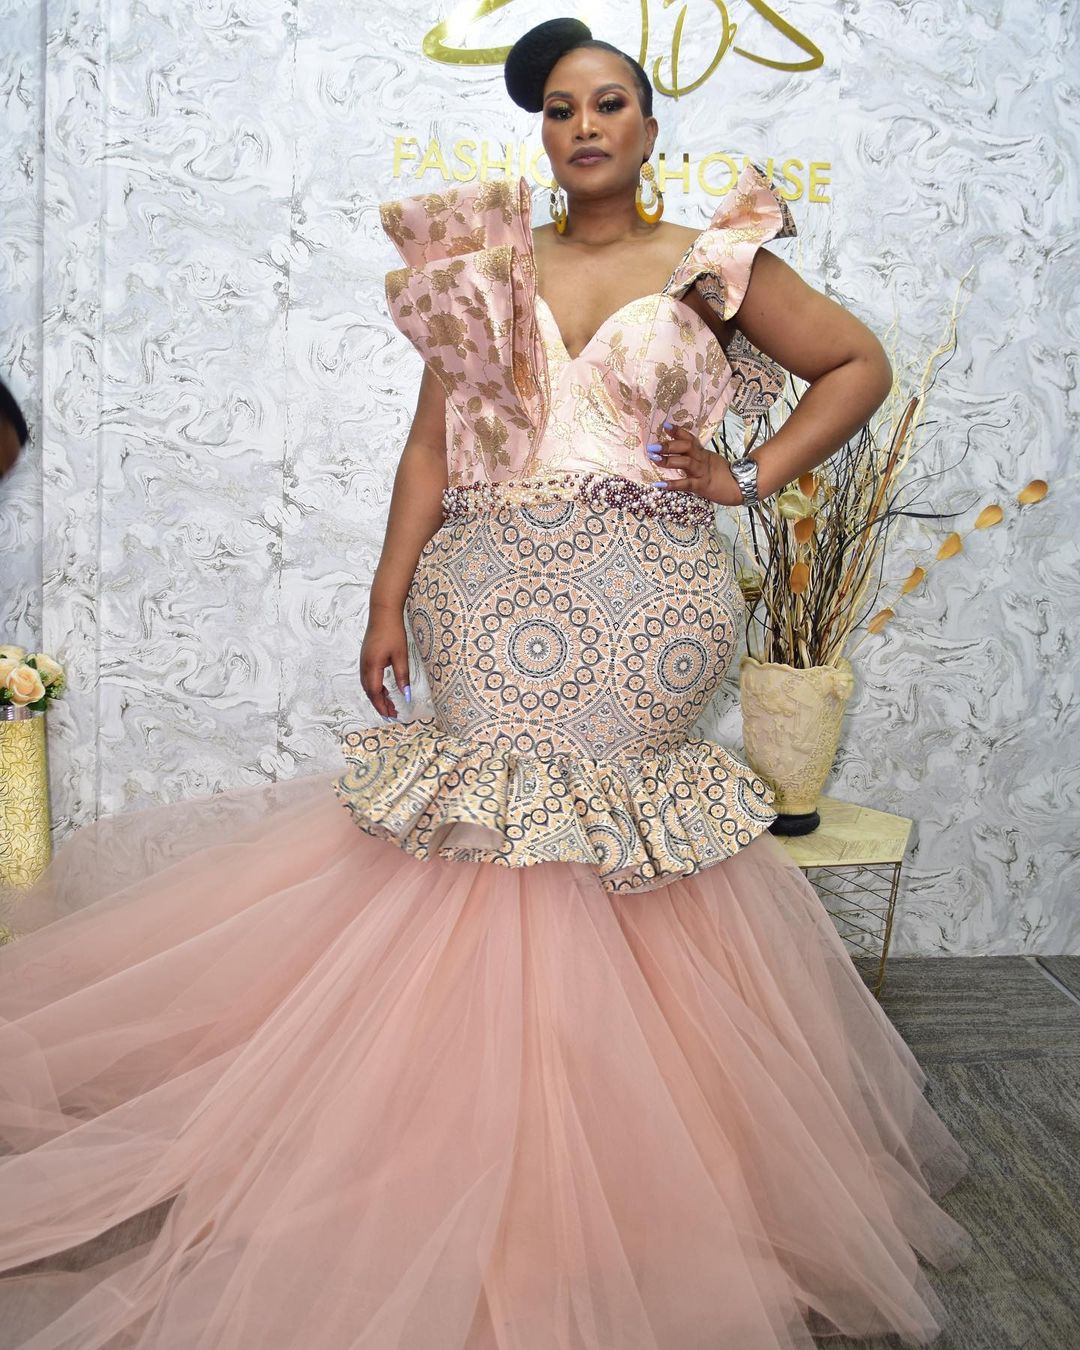 Traditional wedding dresses made to order.| Fourways | Gumtree South Africa